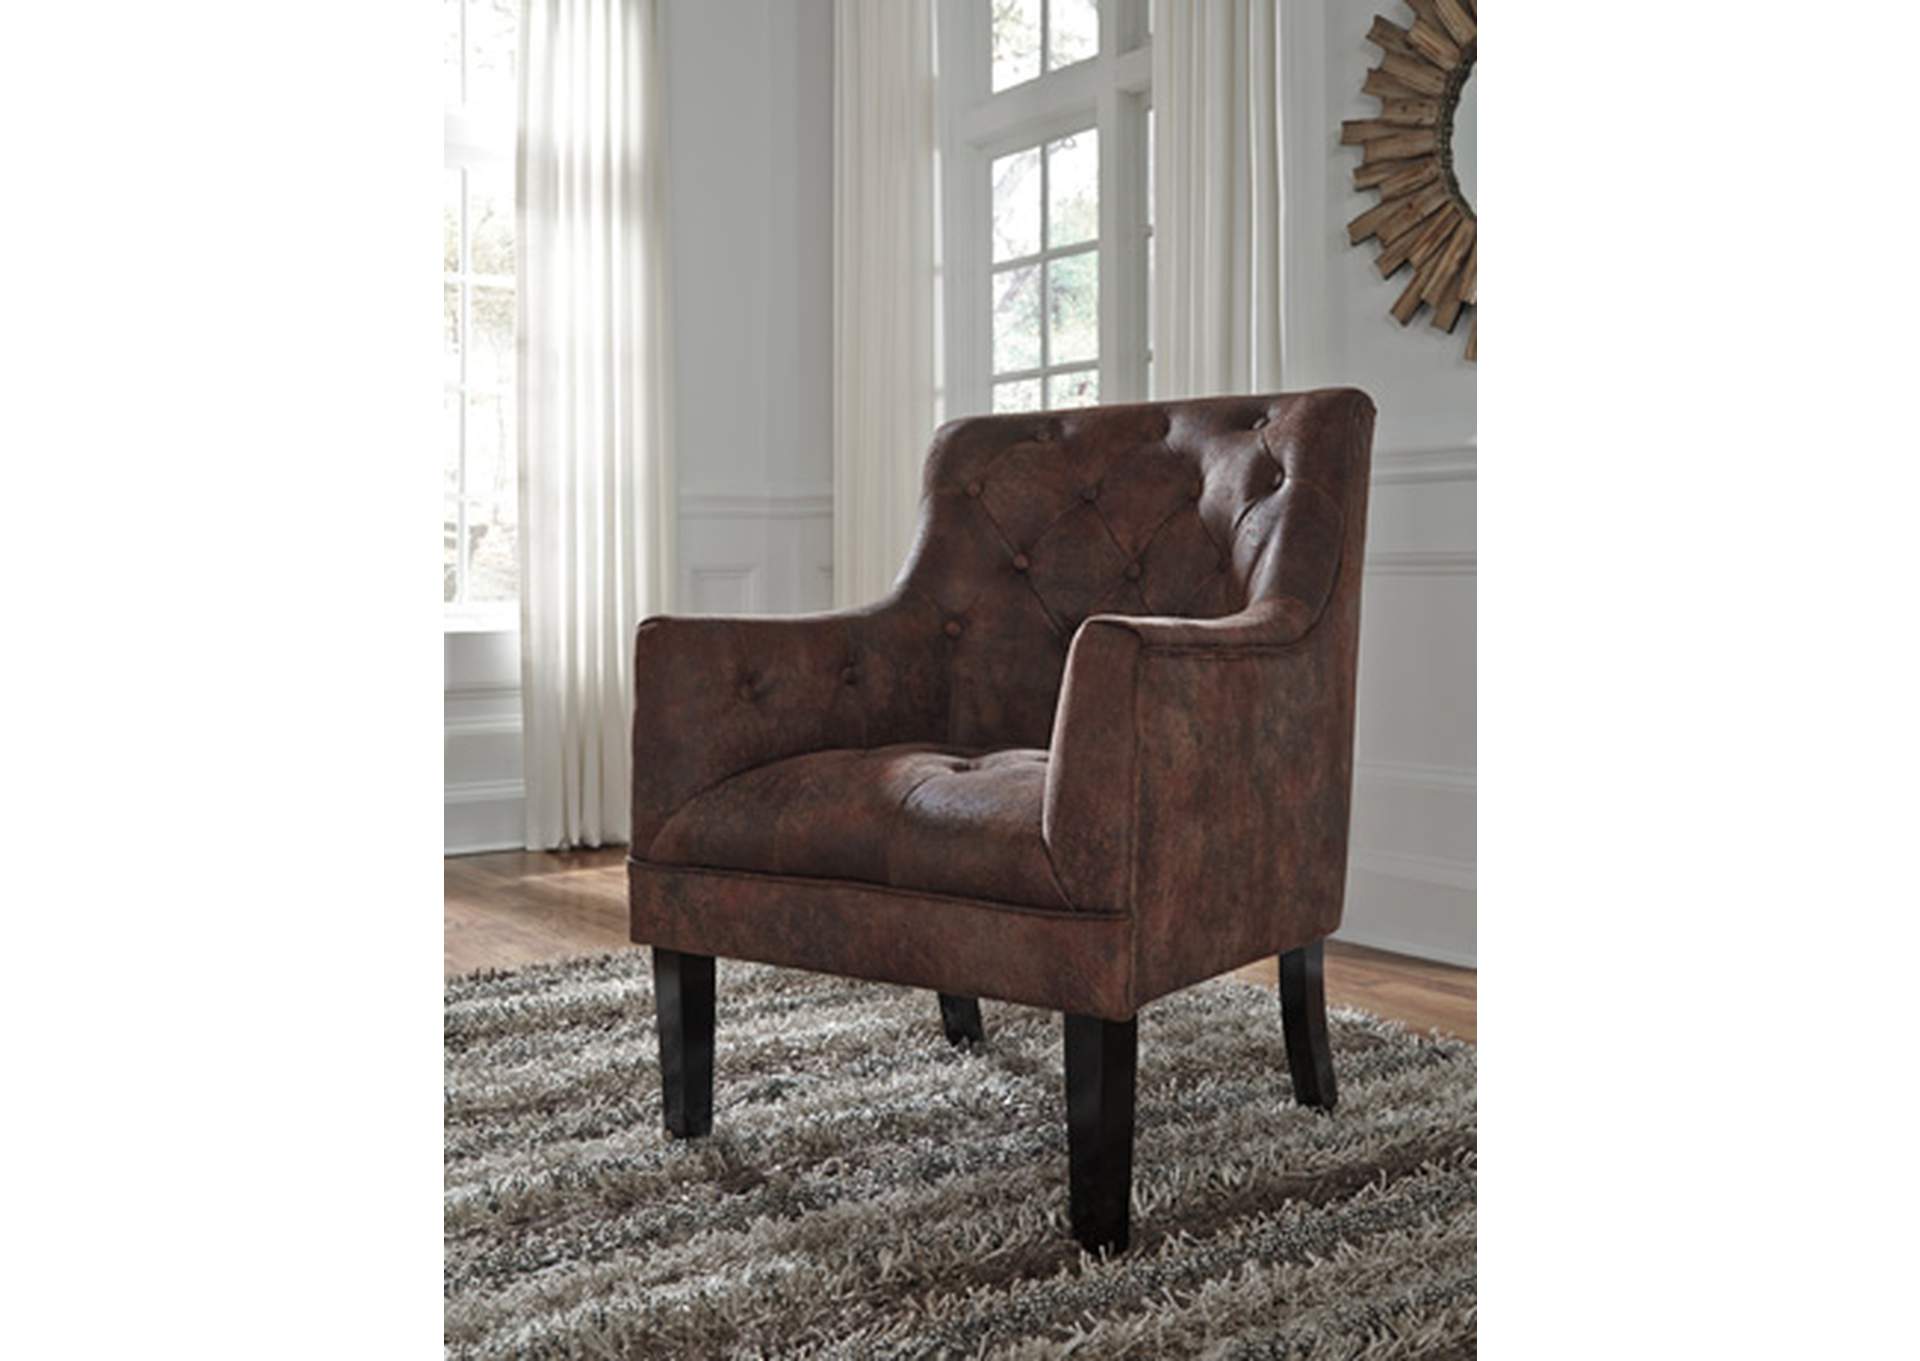 Drakelle Accent Chair,Signature Design By Ashley